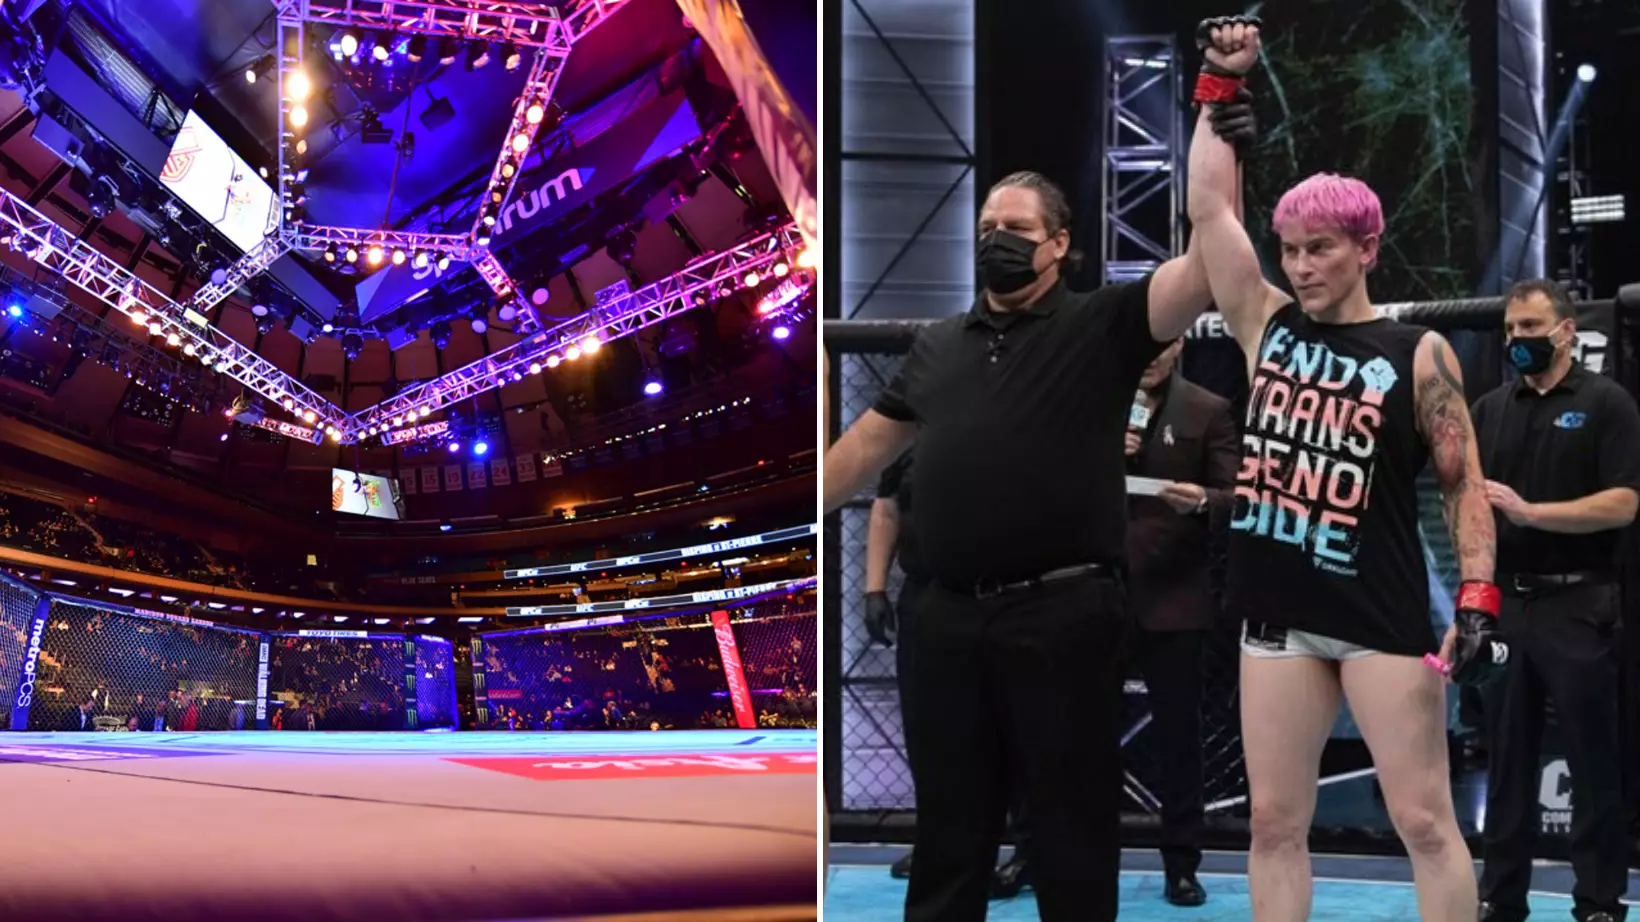 Transgender MMA Star's Win Branded 'Sick' And 'Perverse' In Furious Rant By Former UFC Fighter